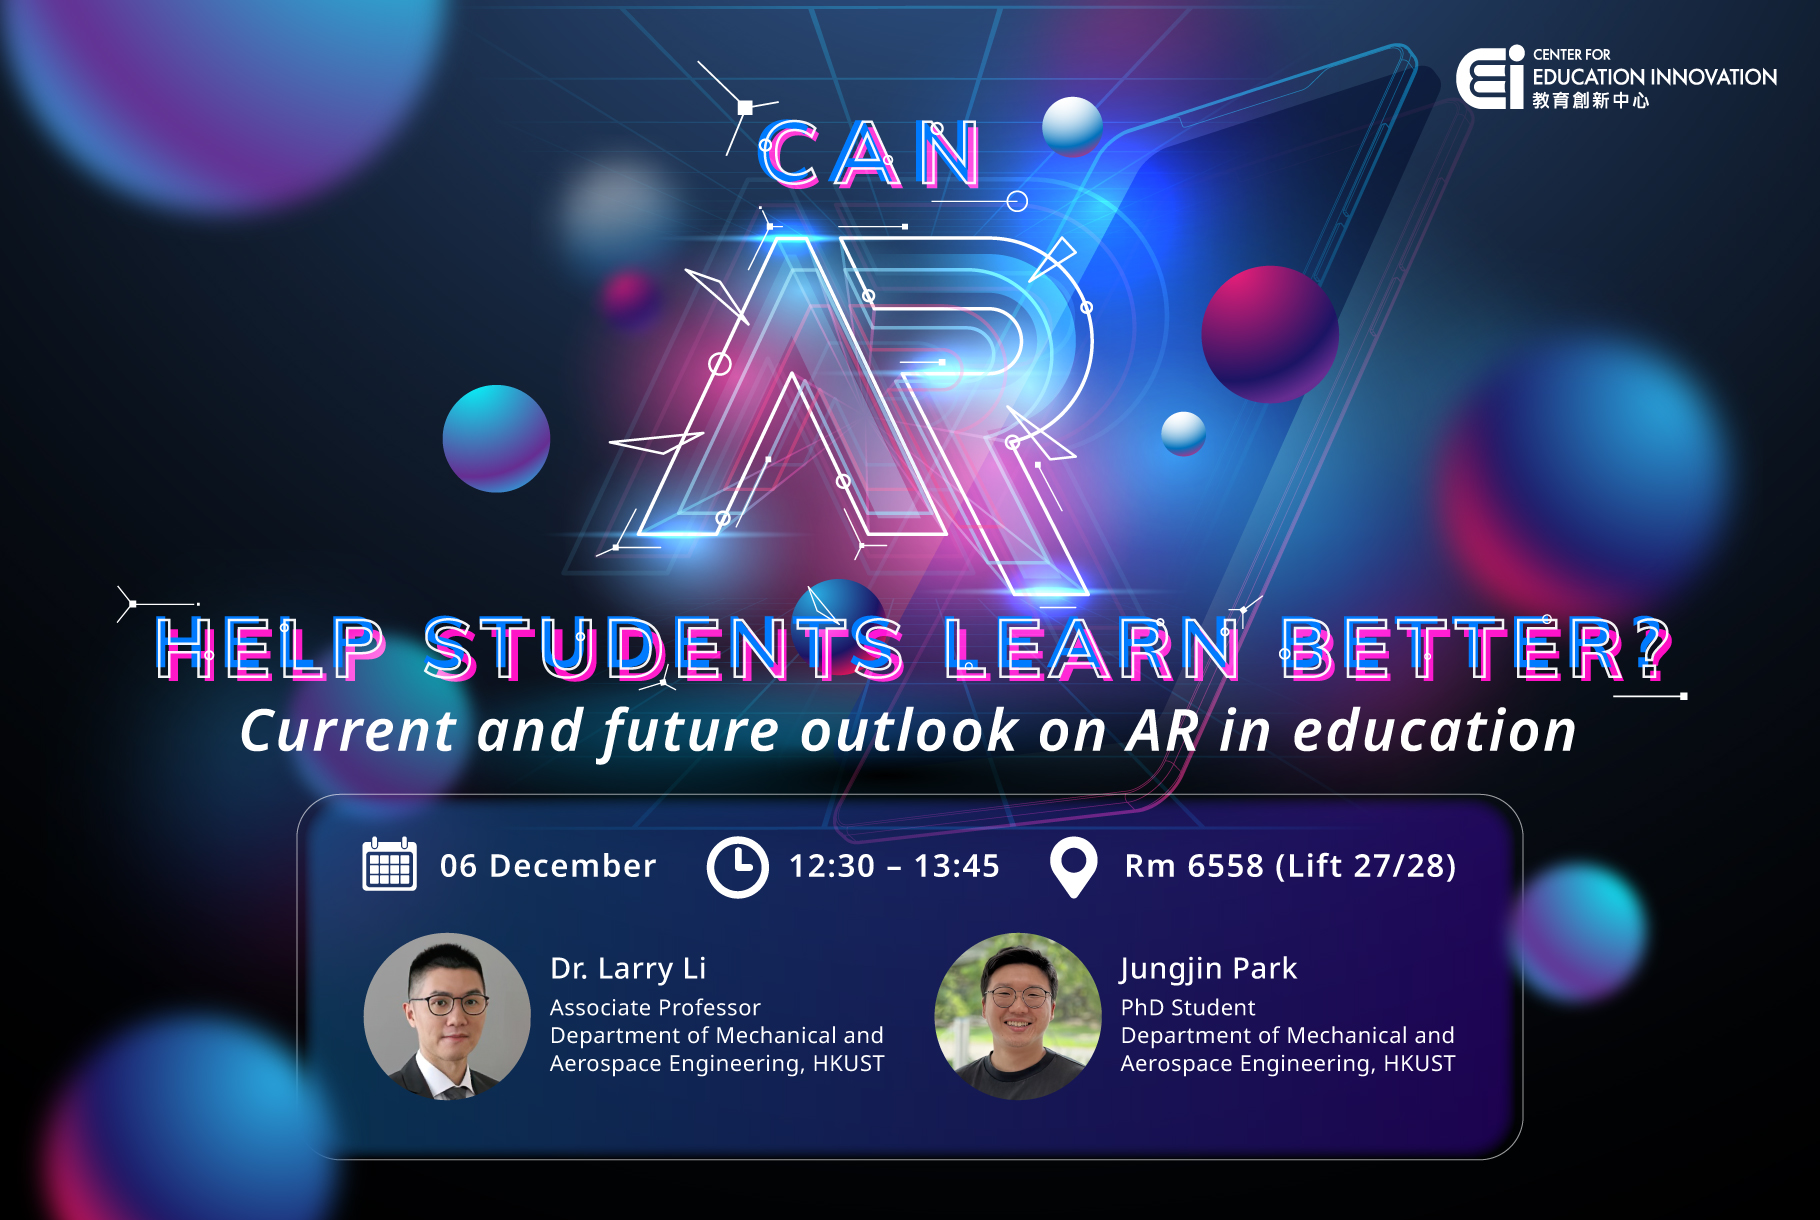 Can AR help students learn better? Current and future outlook on AR in education